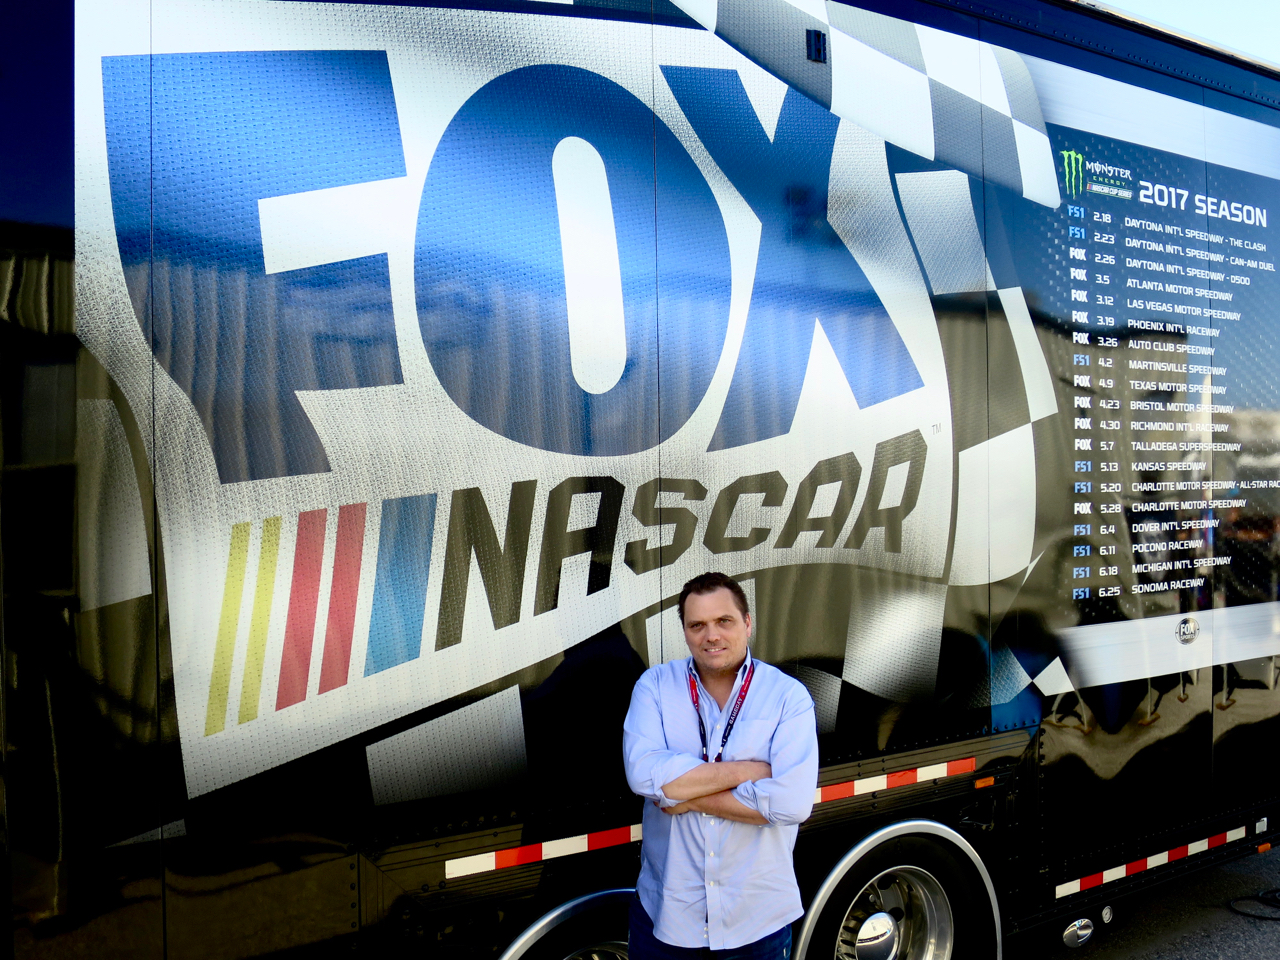 Live From Daytona 500 Fox Sports Set To Take Fox Sports GO to New Heights With Car Channels